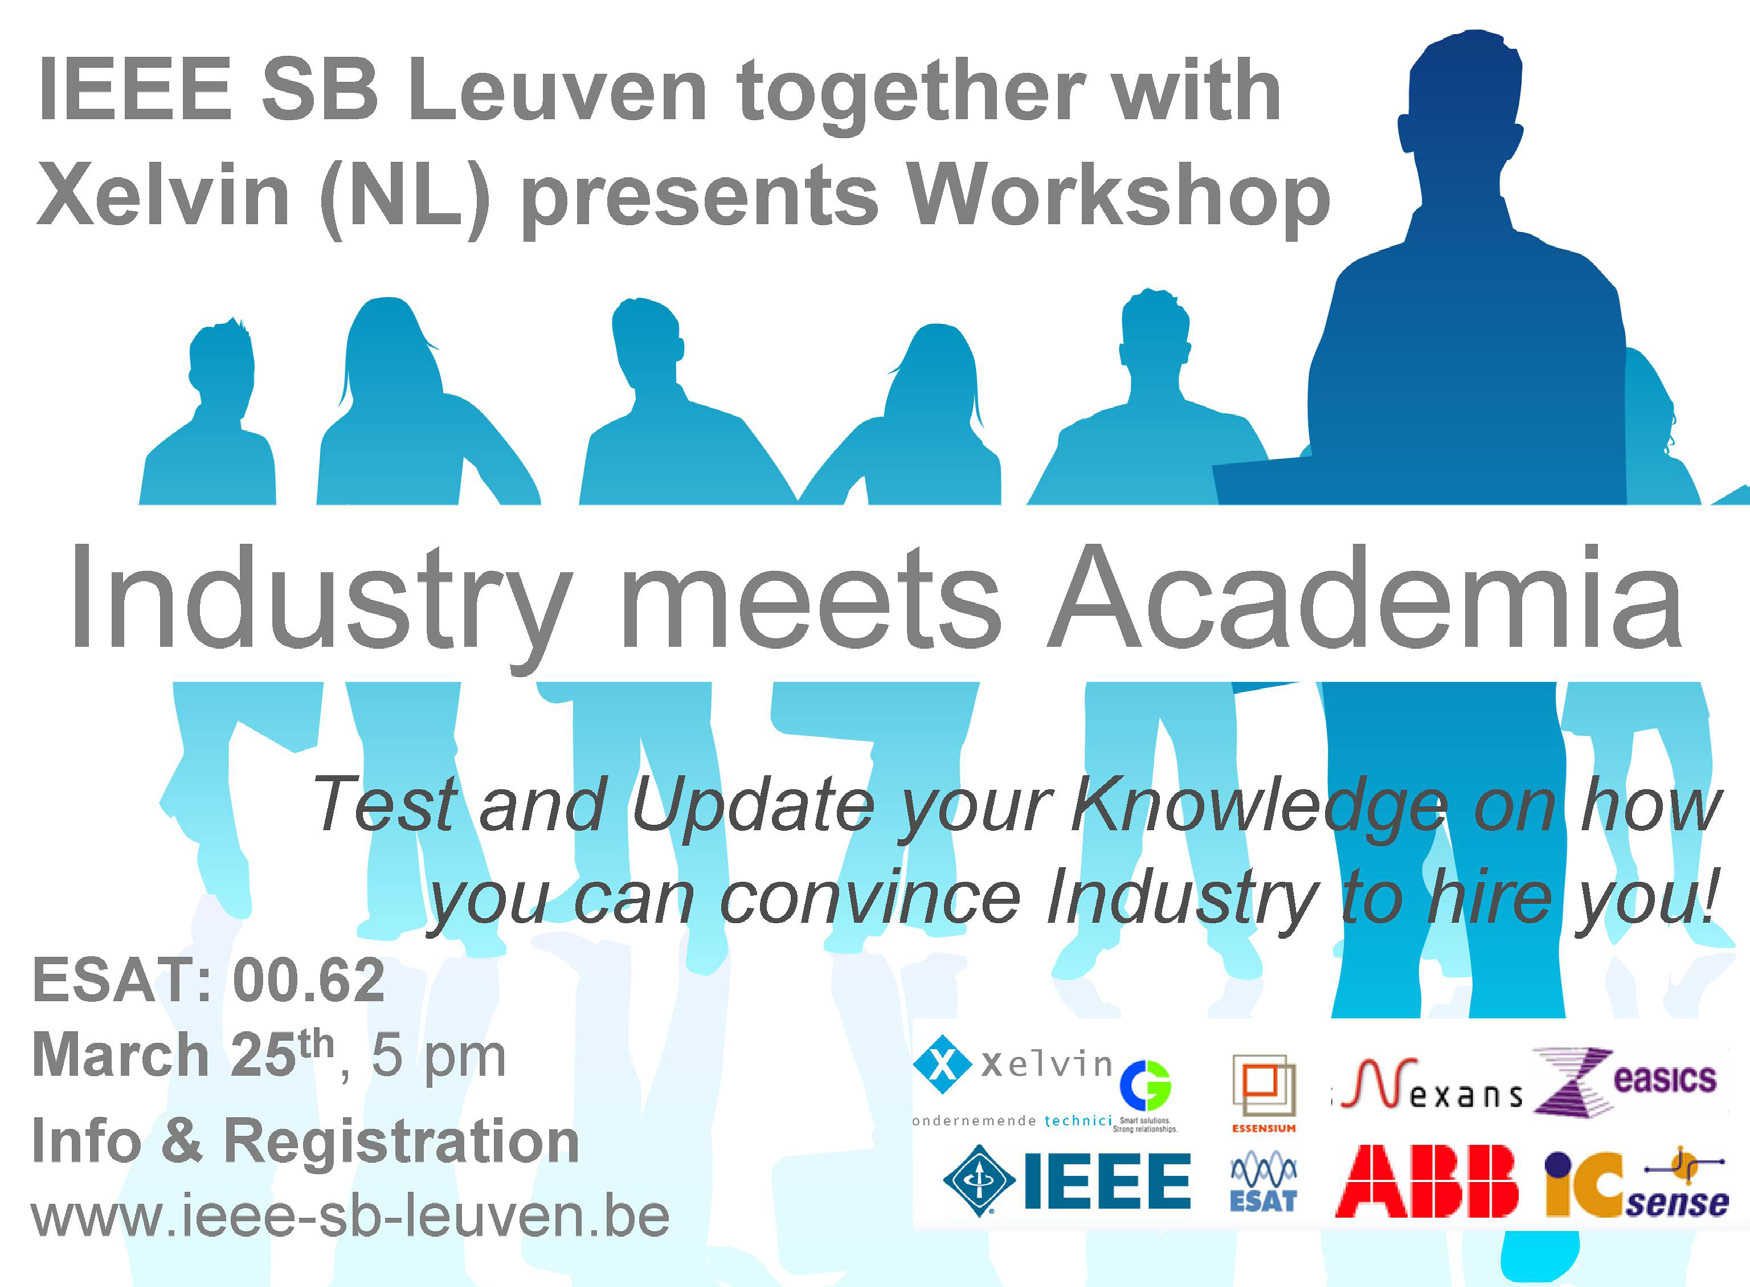 Build your own Student Branch Leuven presents Arduino 8-bit 18th of March 19h30 @ESAT